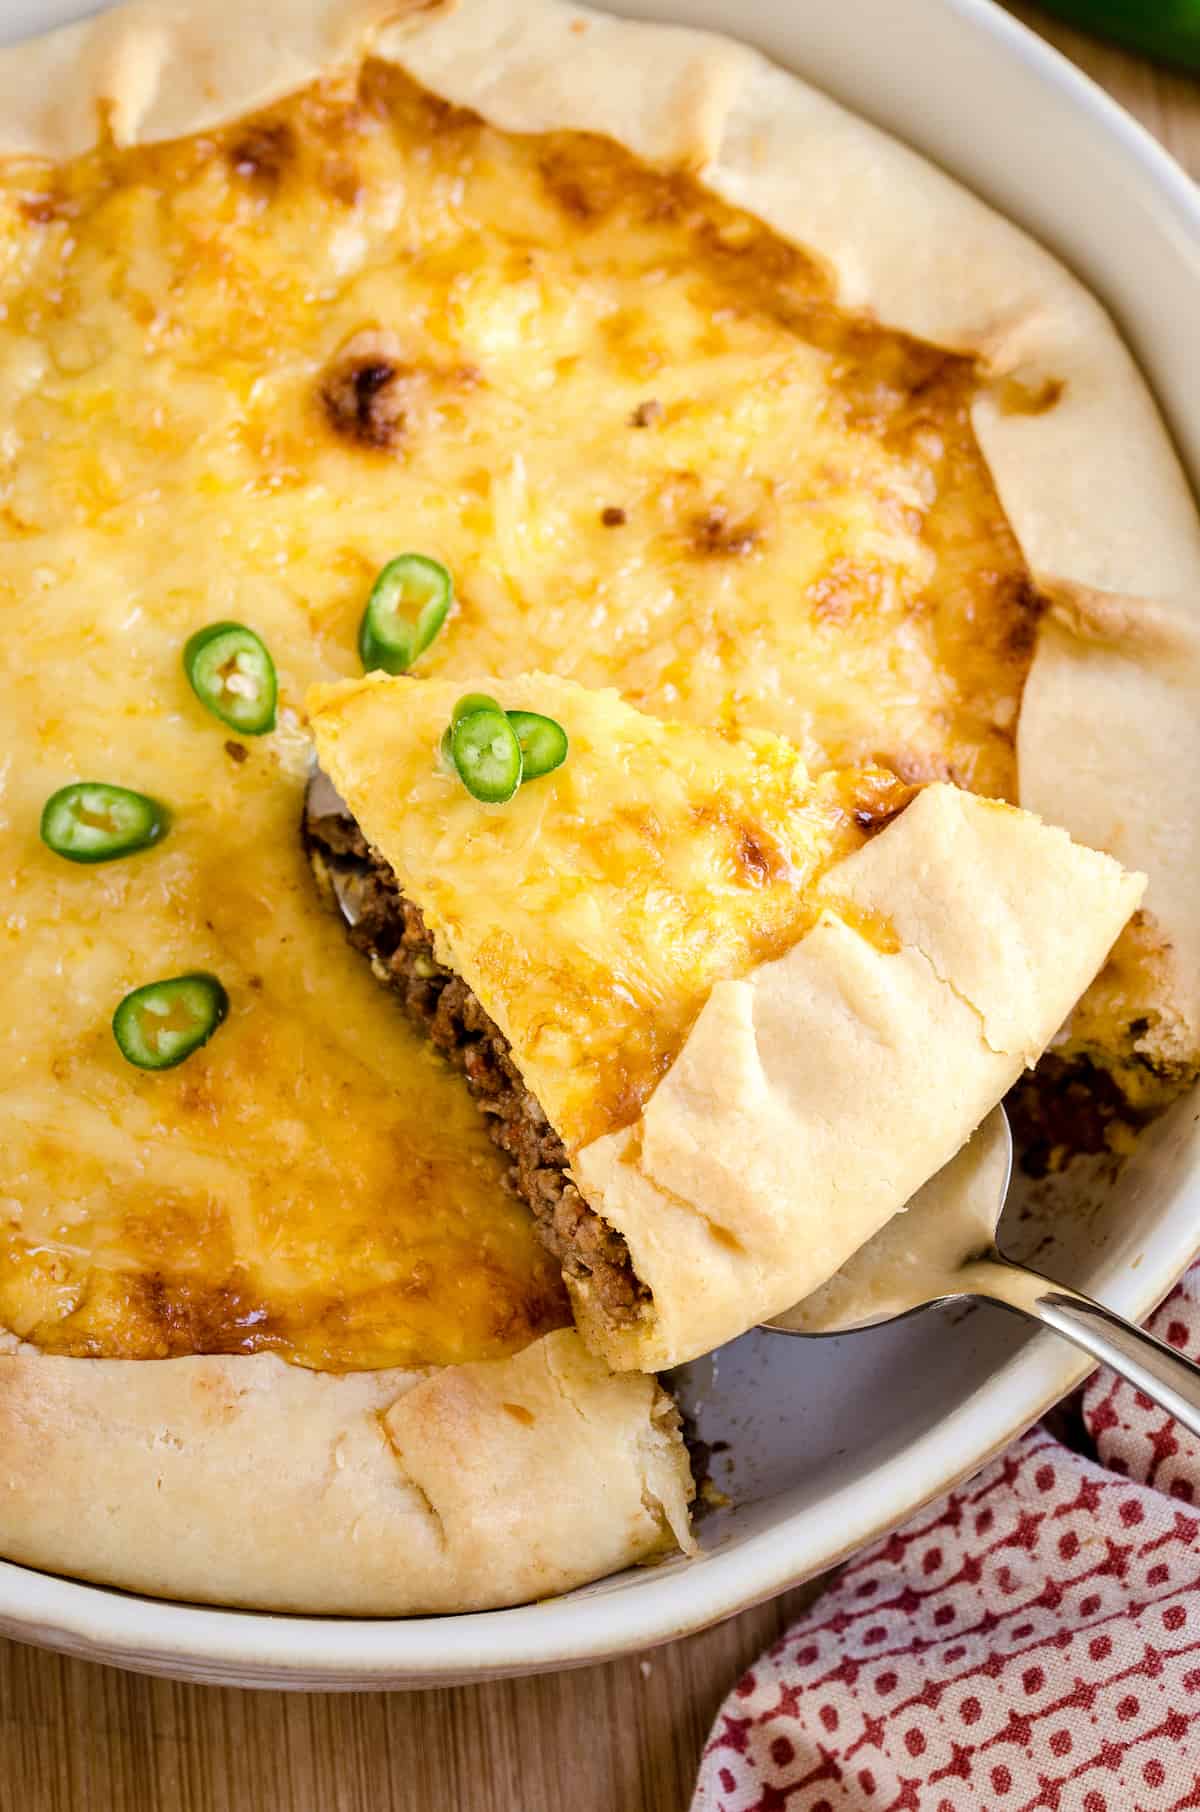 A slice of cheesy quiche topped with green chilies is removed from a fully baked quiche.